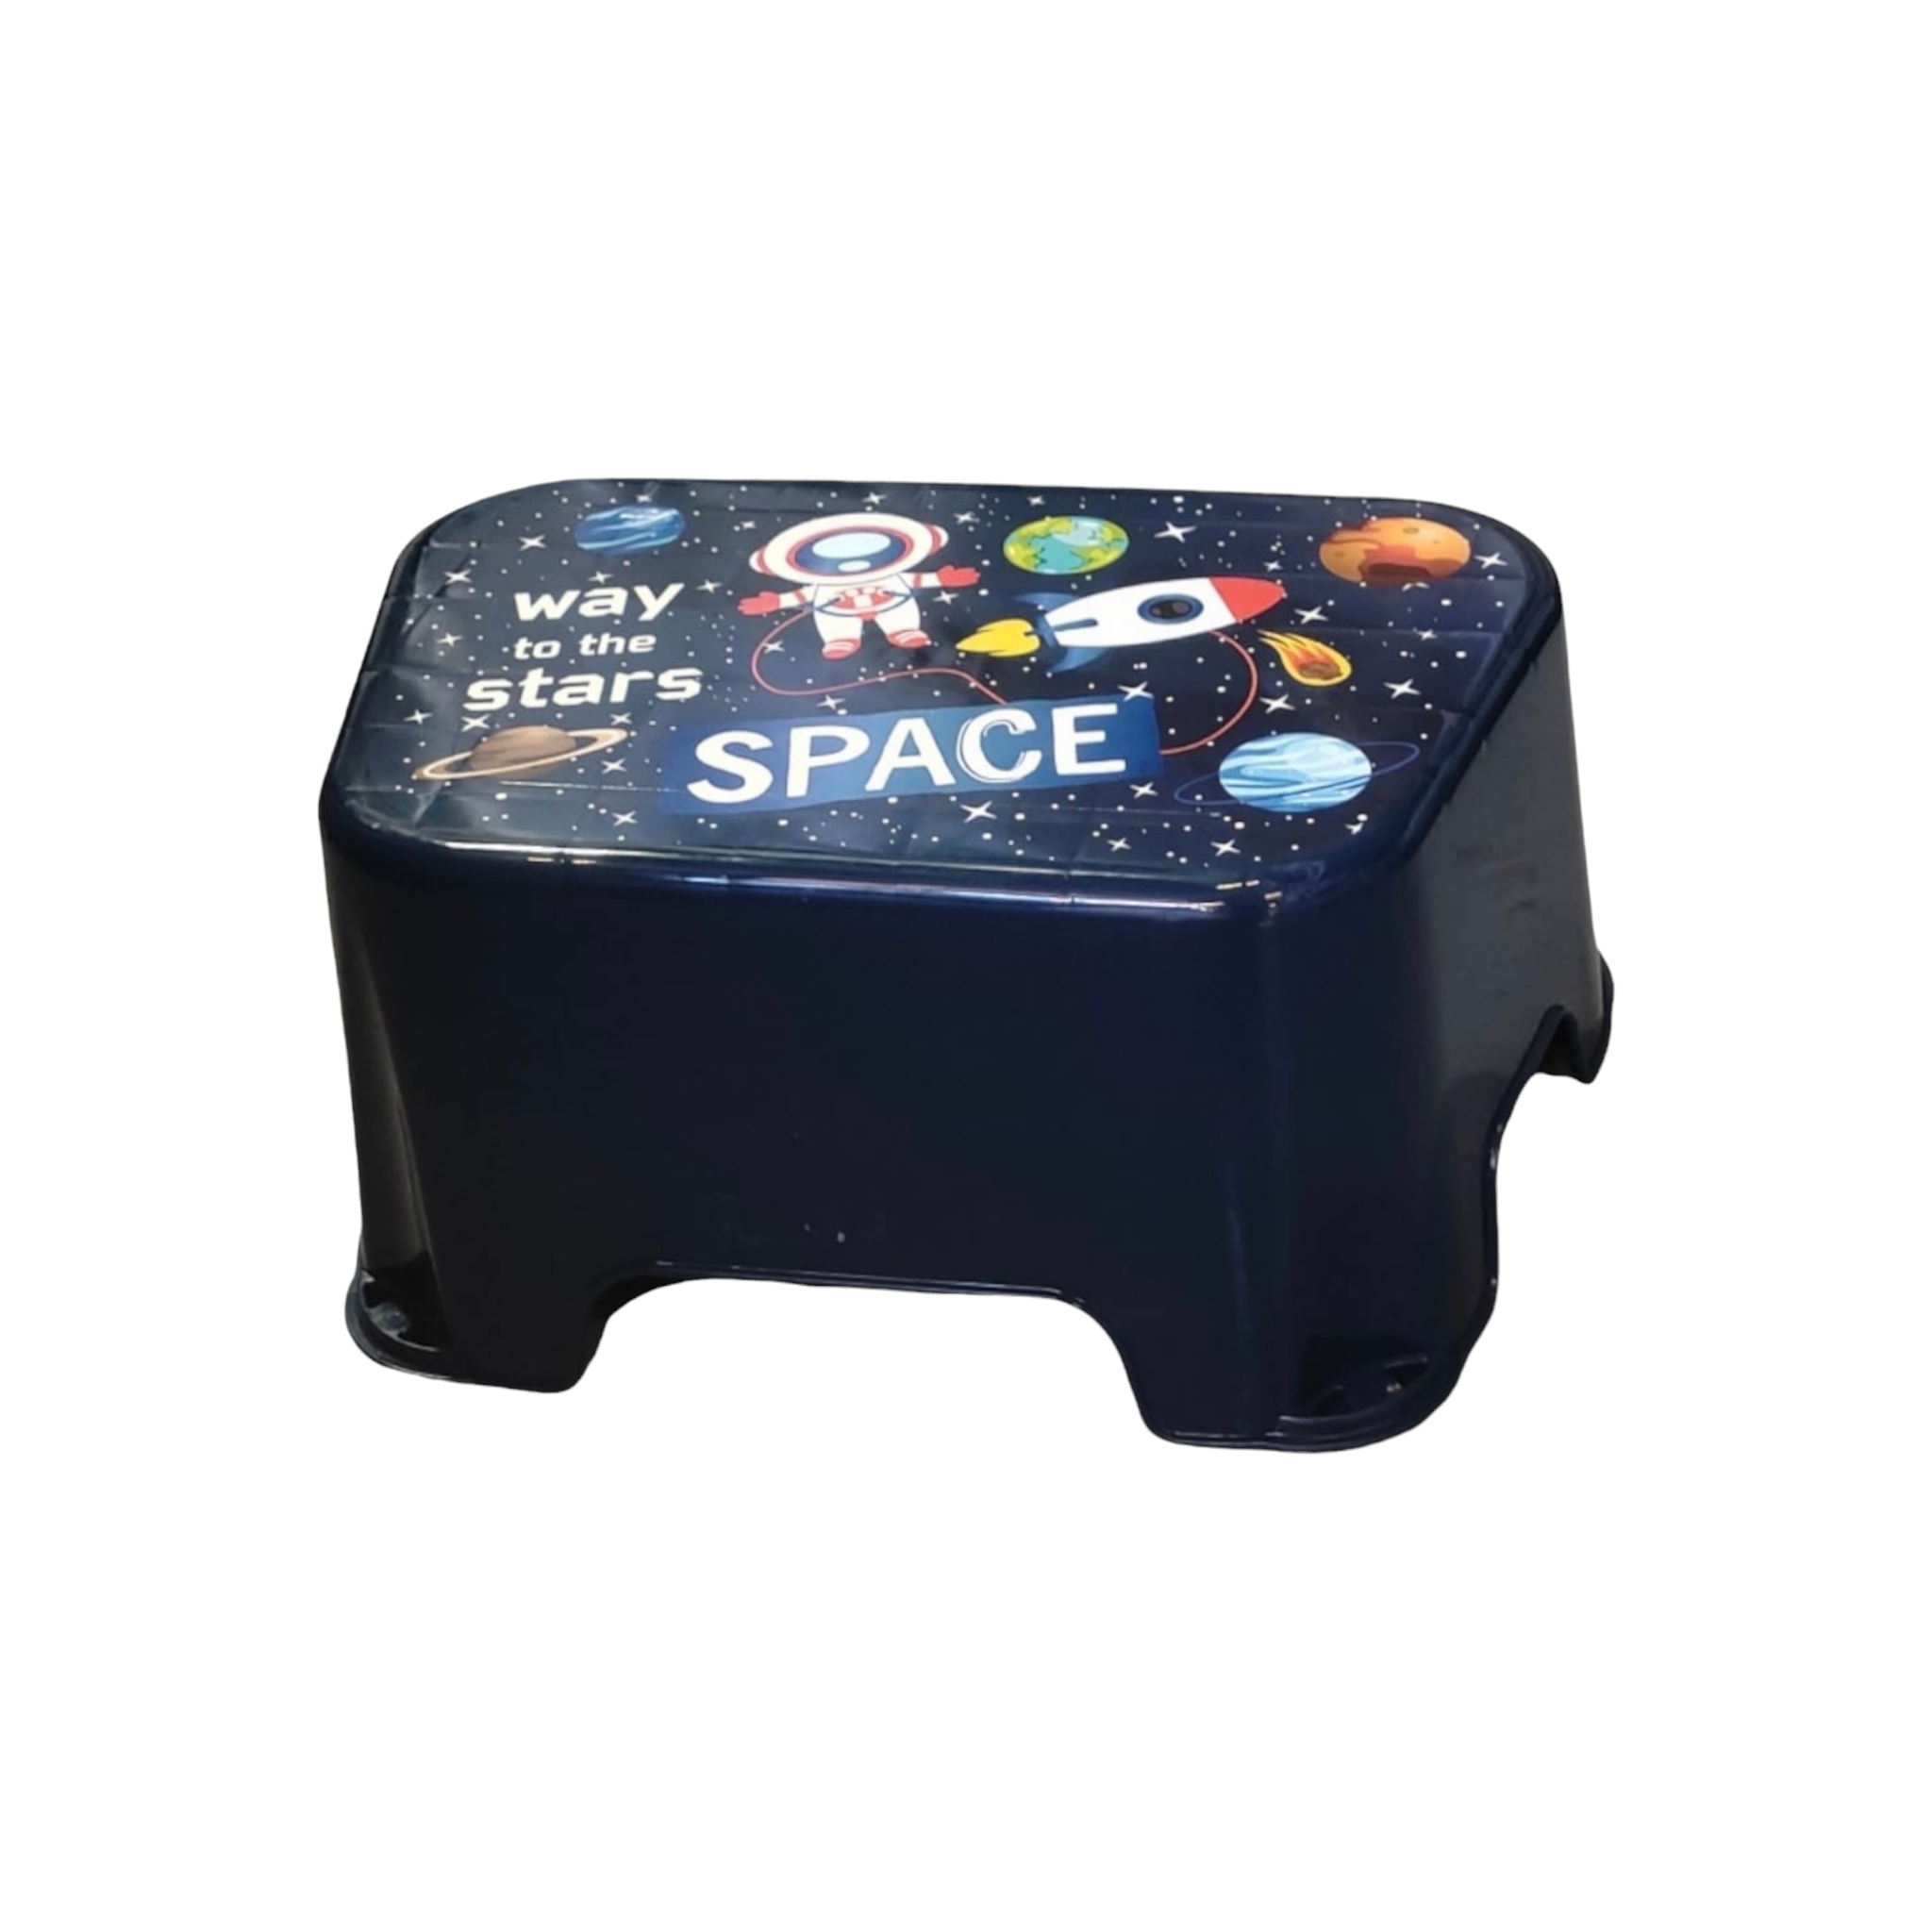 Tuffex Plastic Single Step Stool For Kids Patterned